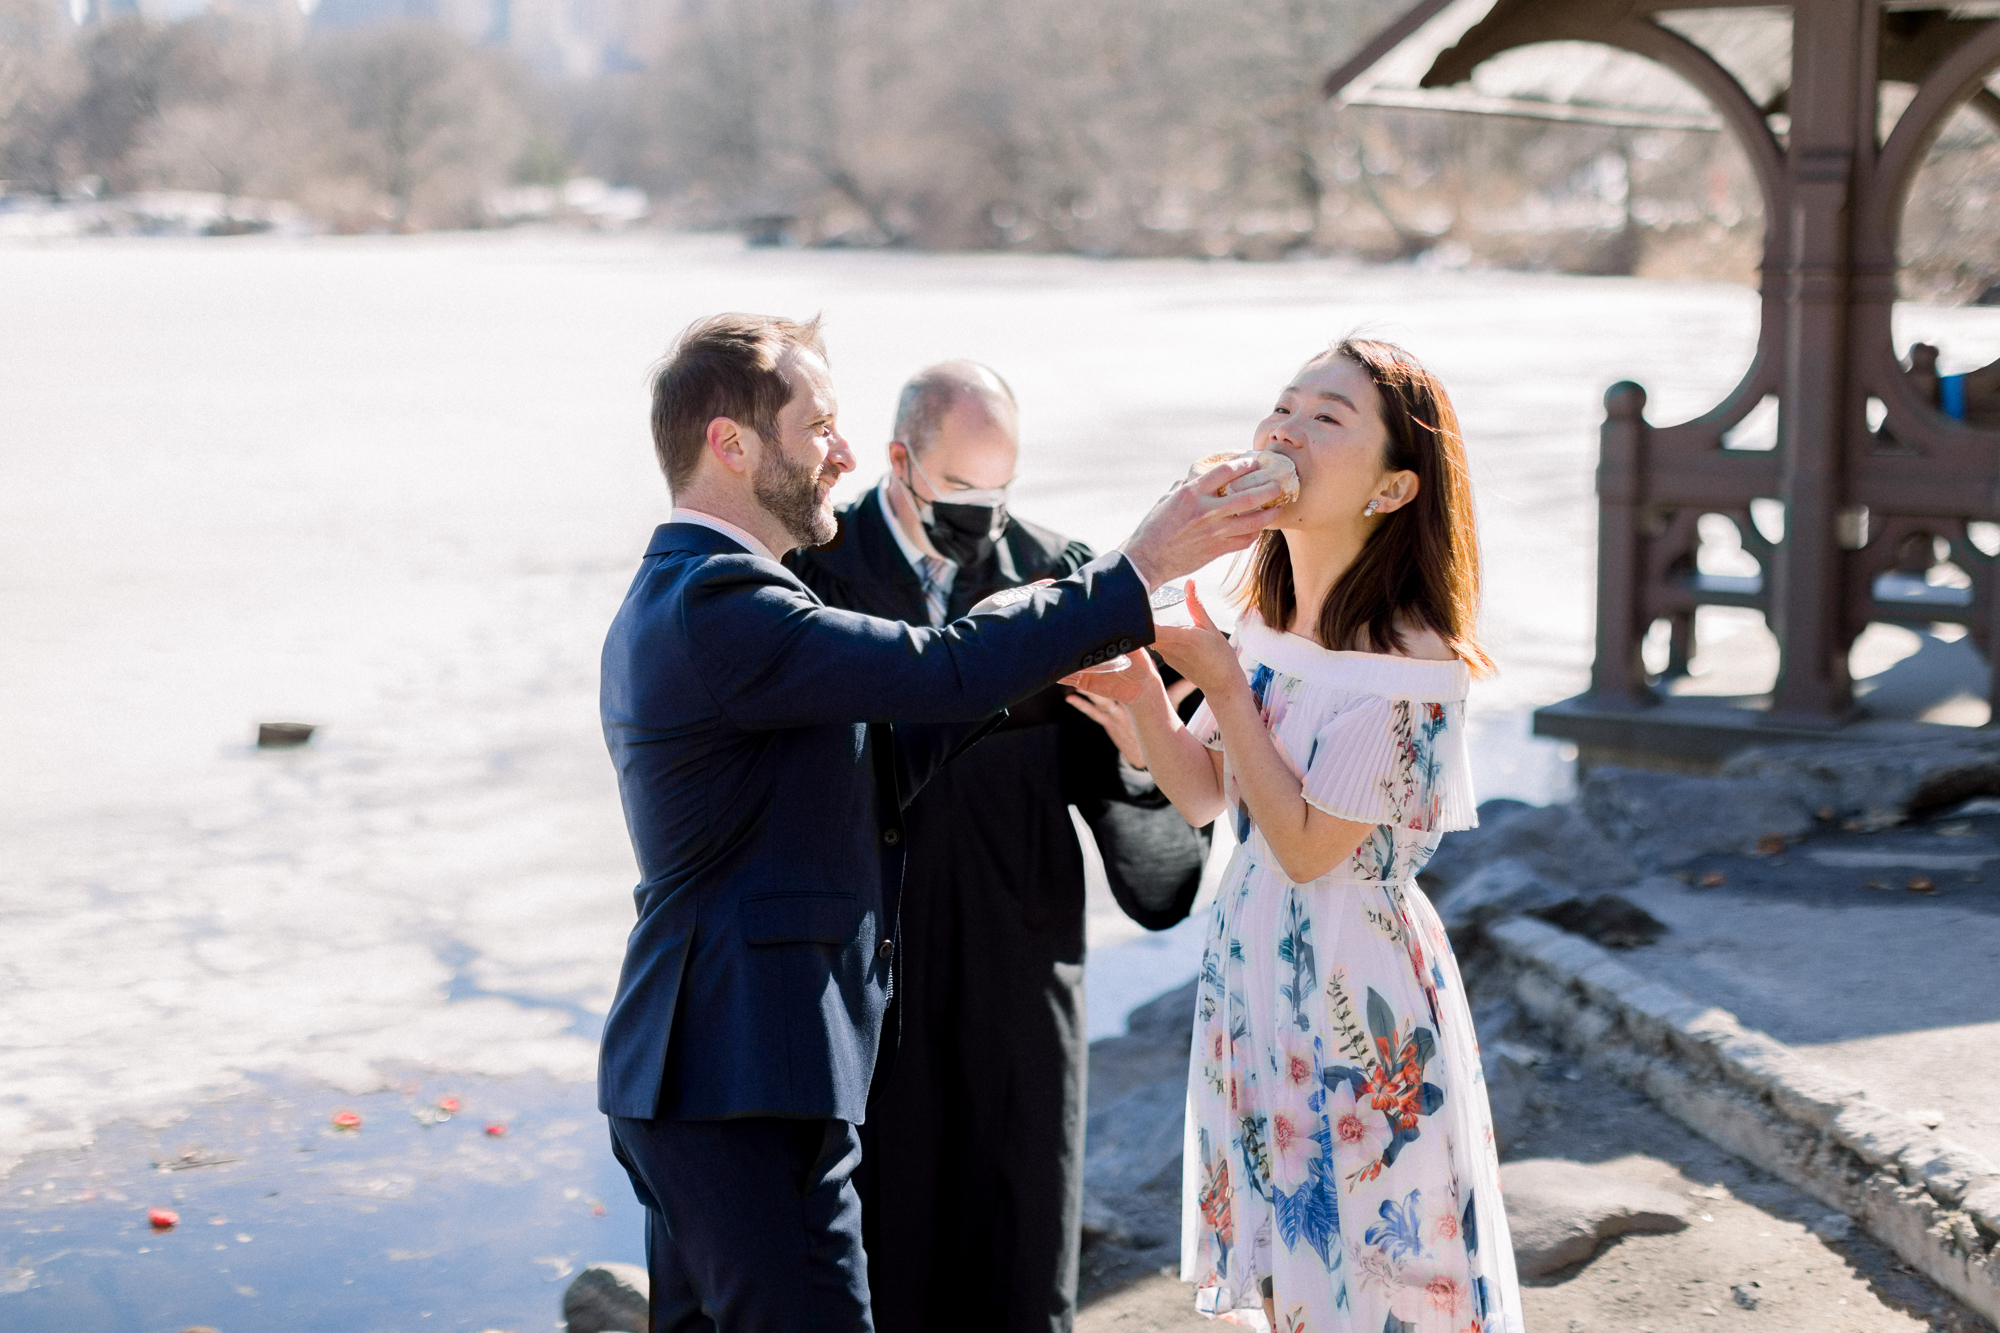 Sweet Central Park Wedding Photos in Wintery New York